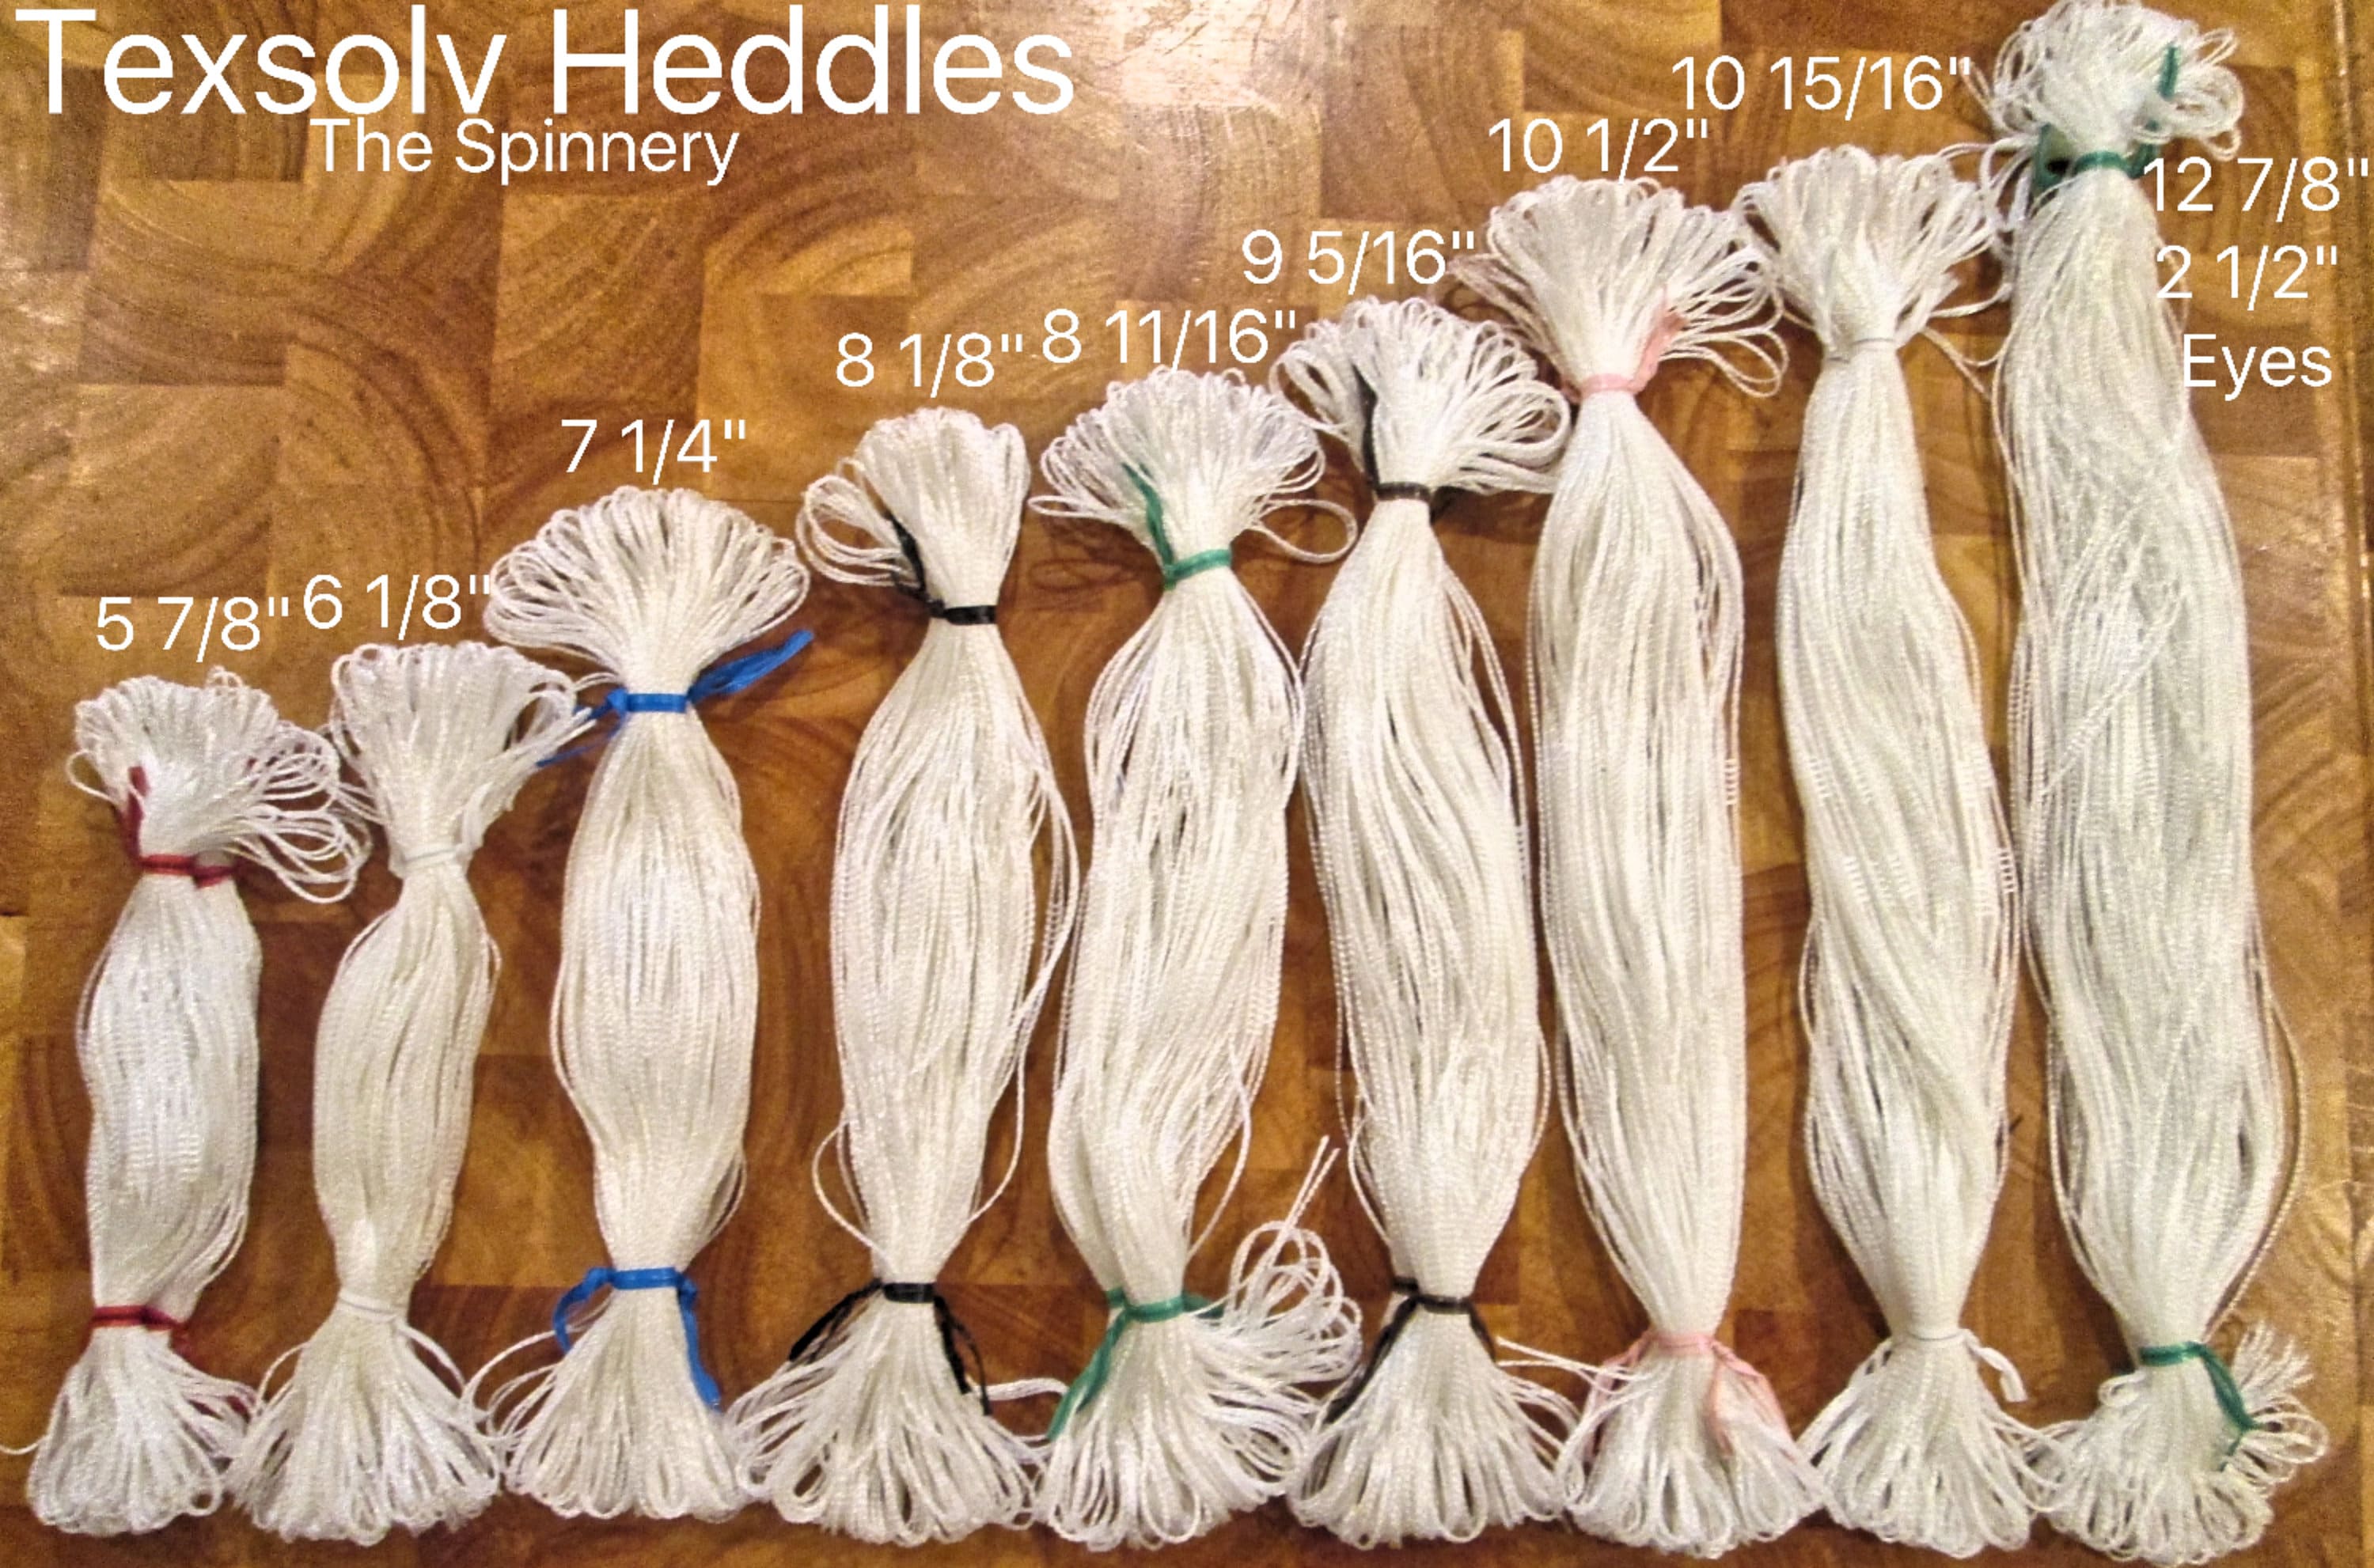 Pack of 100 11 Toika Texsolv Heddles for Weaving 